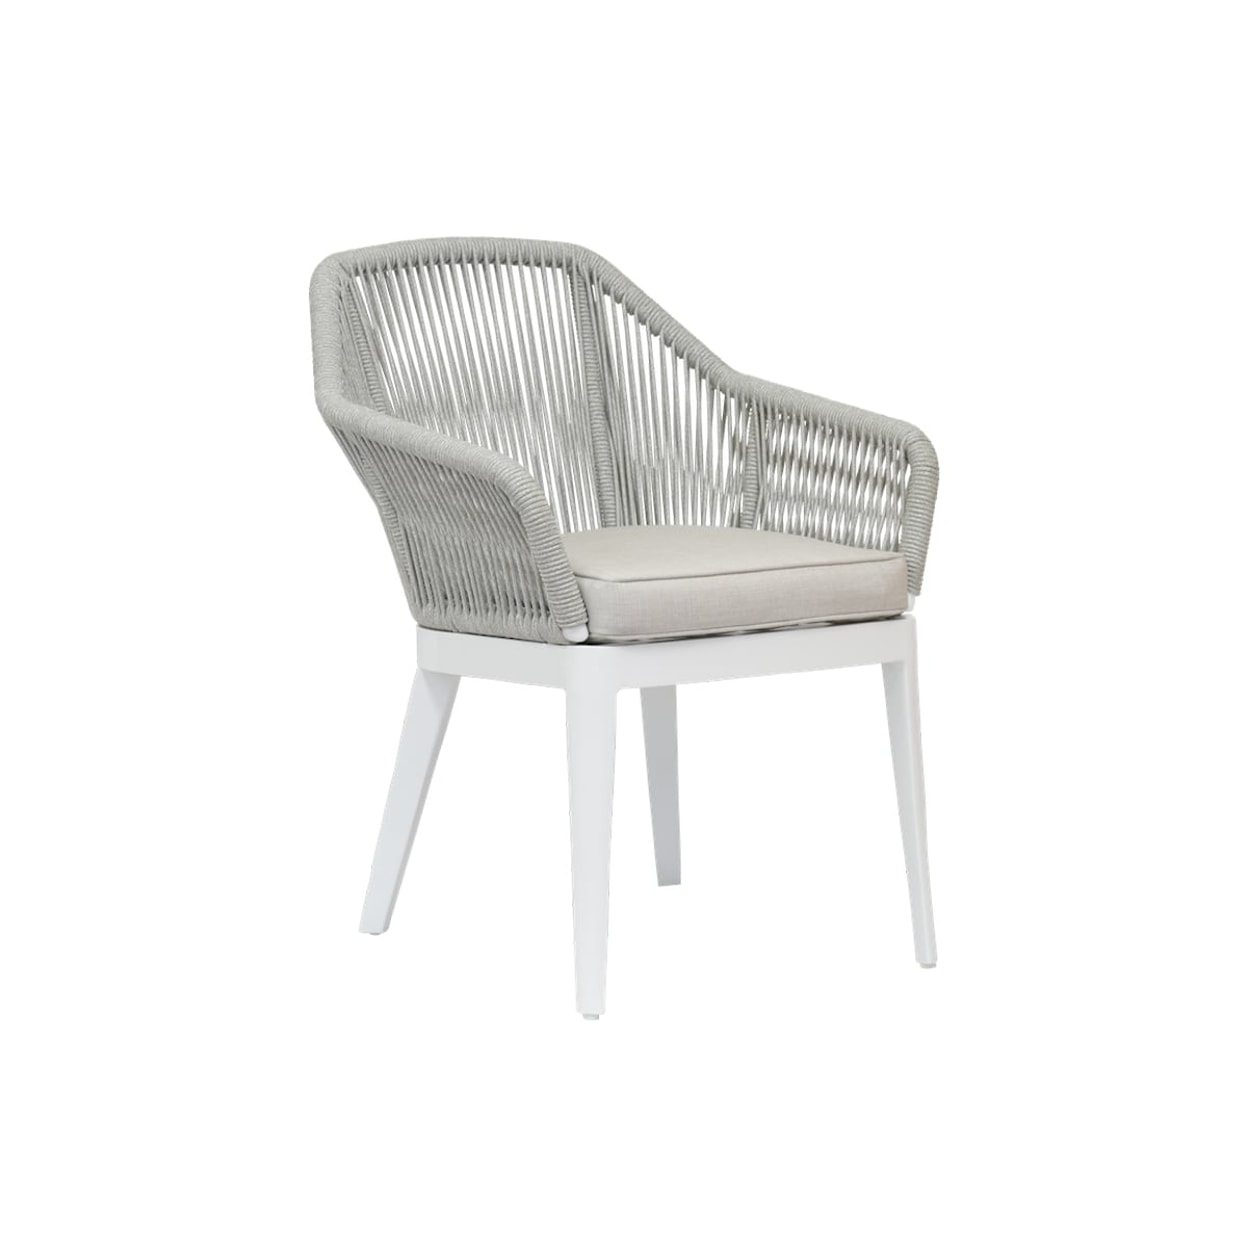 Sunset West Miami Upholstered Dining Chair